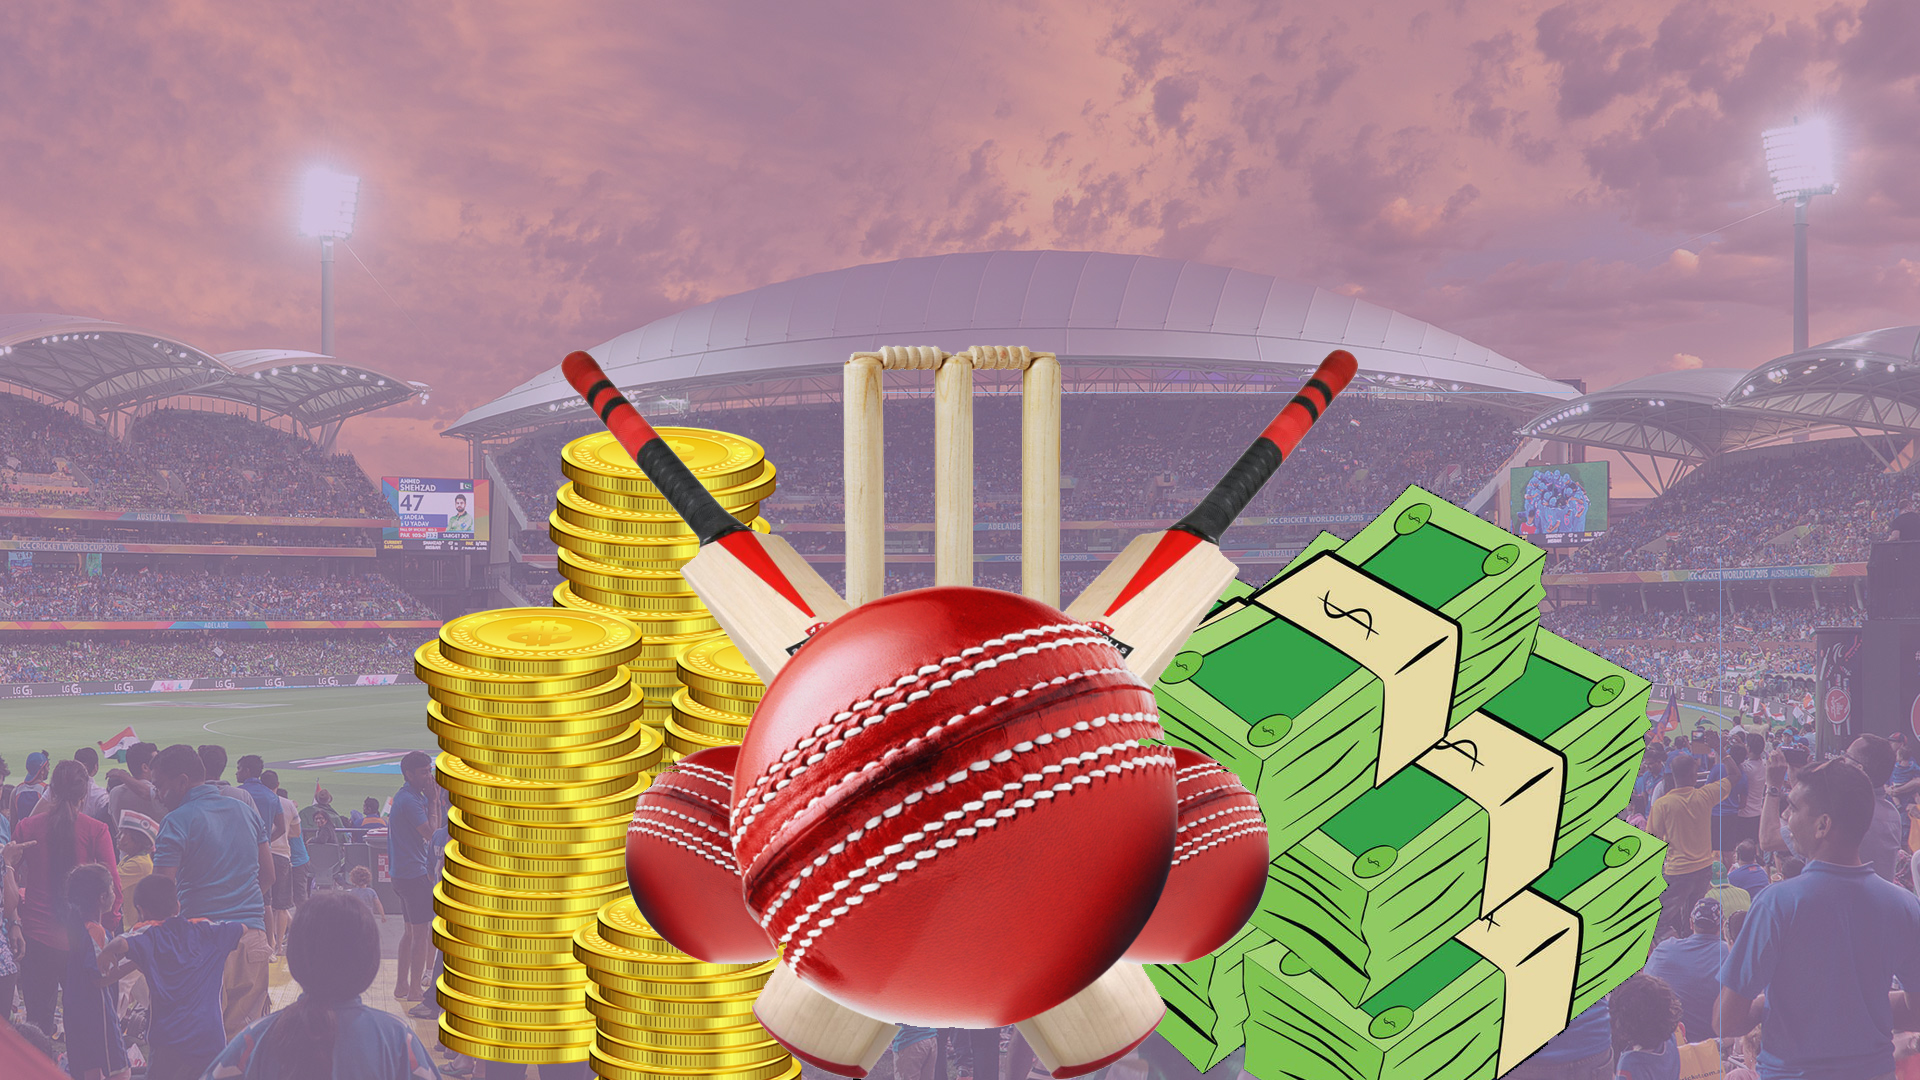 A detailed discussion about cricket betting odds